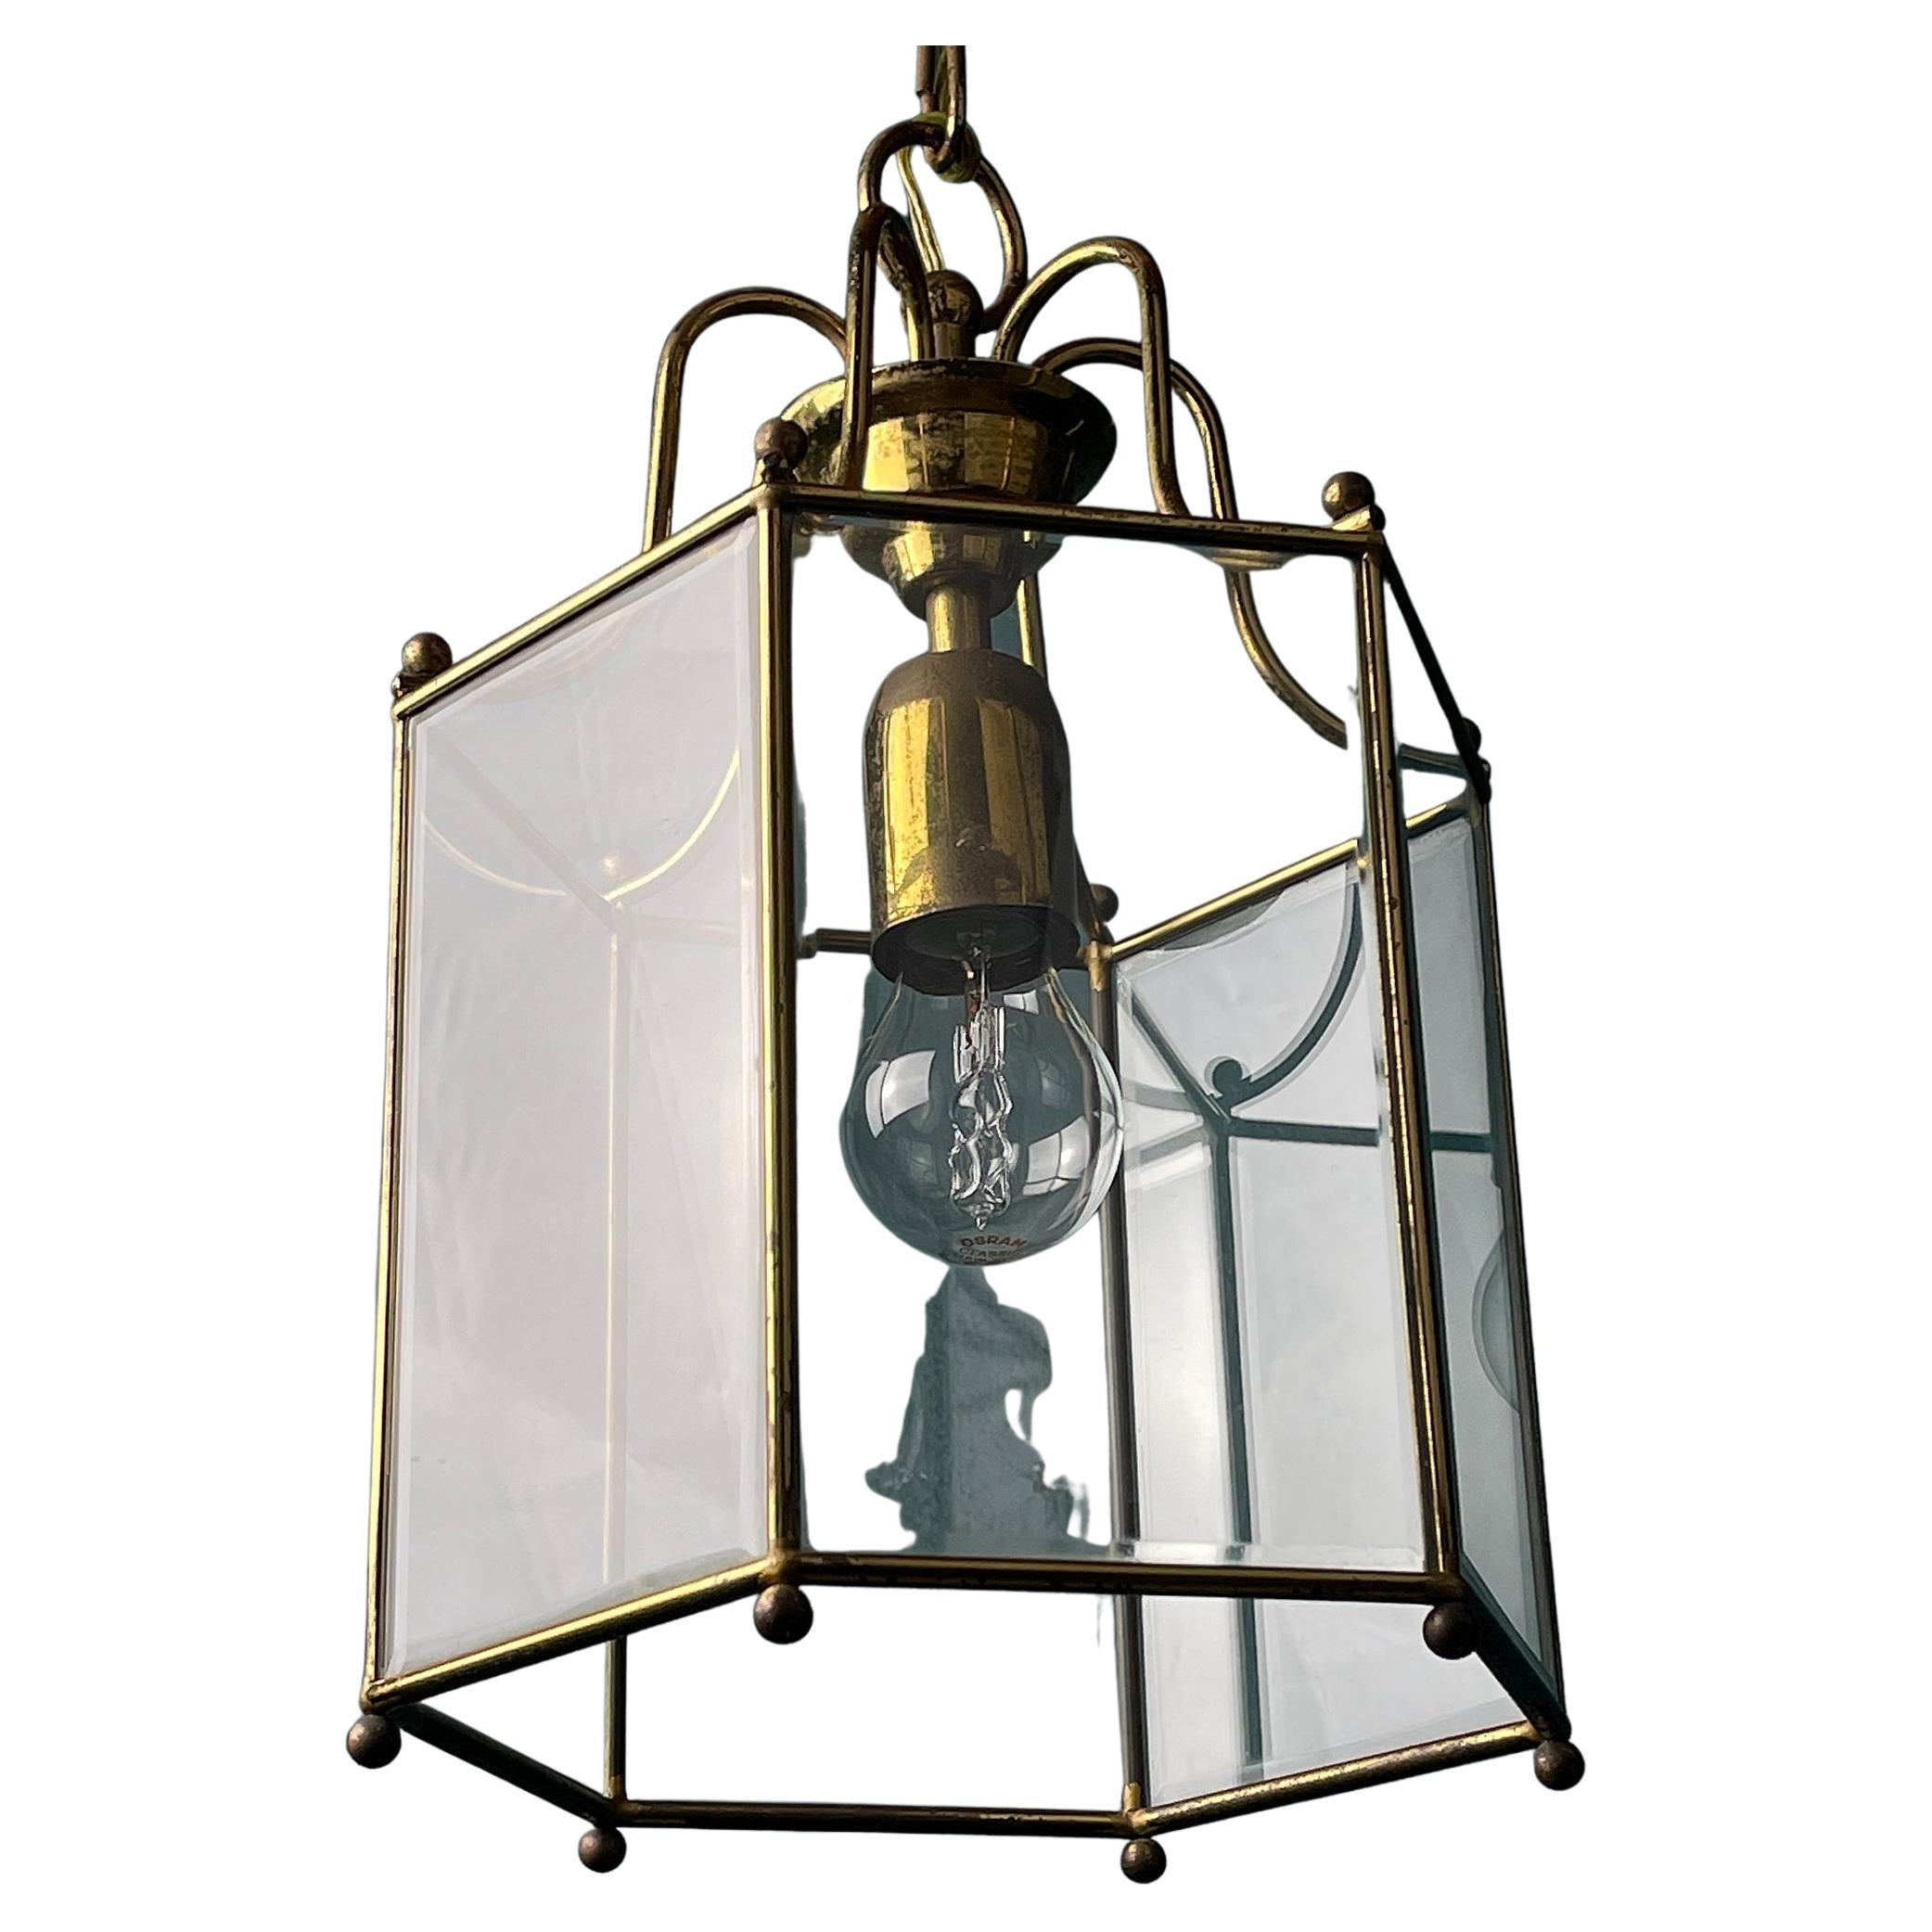 This beautiful brass lamp in the Gregorian style was made in Italy in the 60s of the last century. Completely original. Original glass with polished edges. The wiring is original. The lamp is in excellent vintage condition. Fully functional.